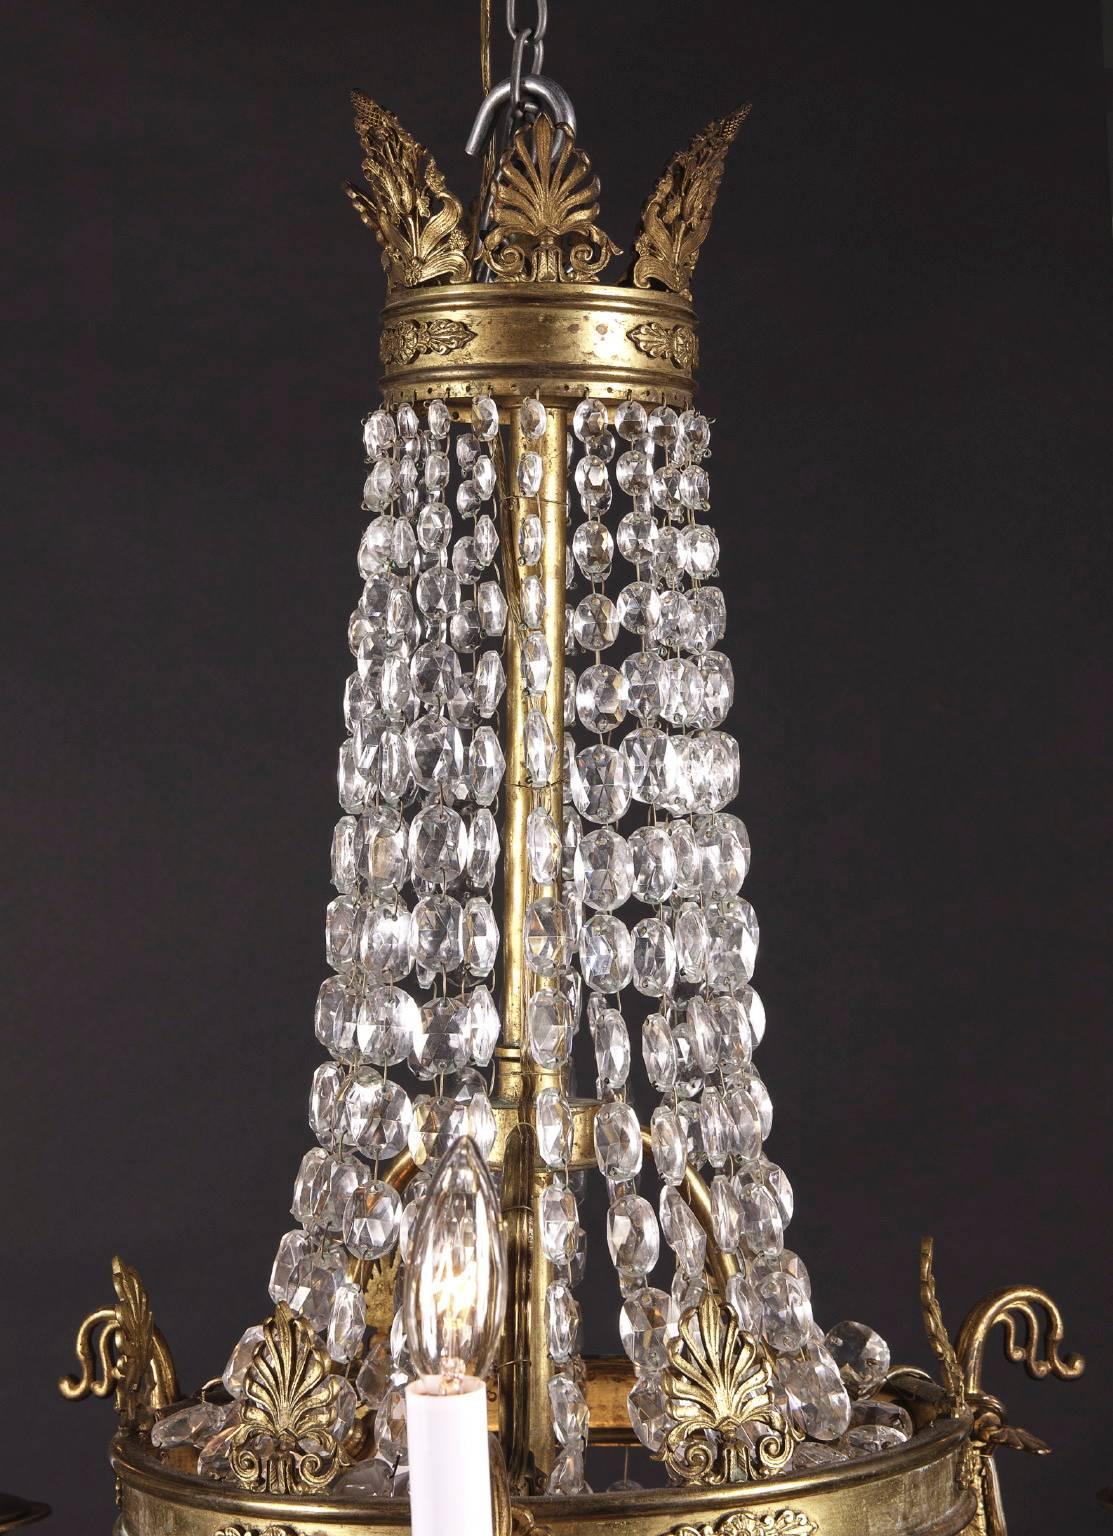 This small chandelier is from France and is made of beautiful bronze and crystal elements. A bronze ring rests at the center of the chandelier, with palm fronds rising out the top of it. Crystals cascade down from the top of the chandelier to this